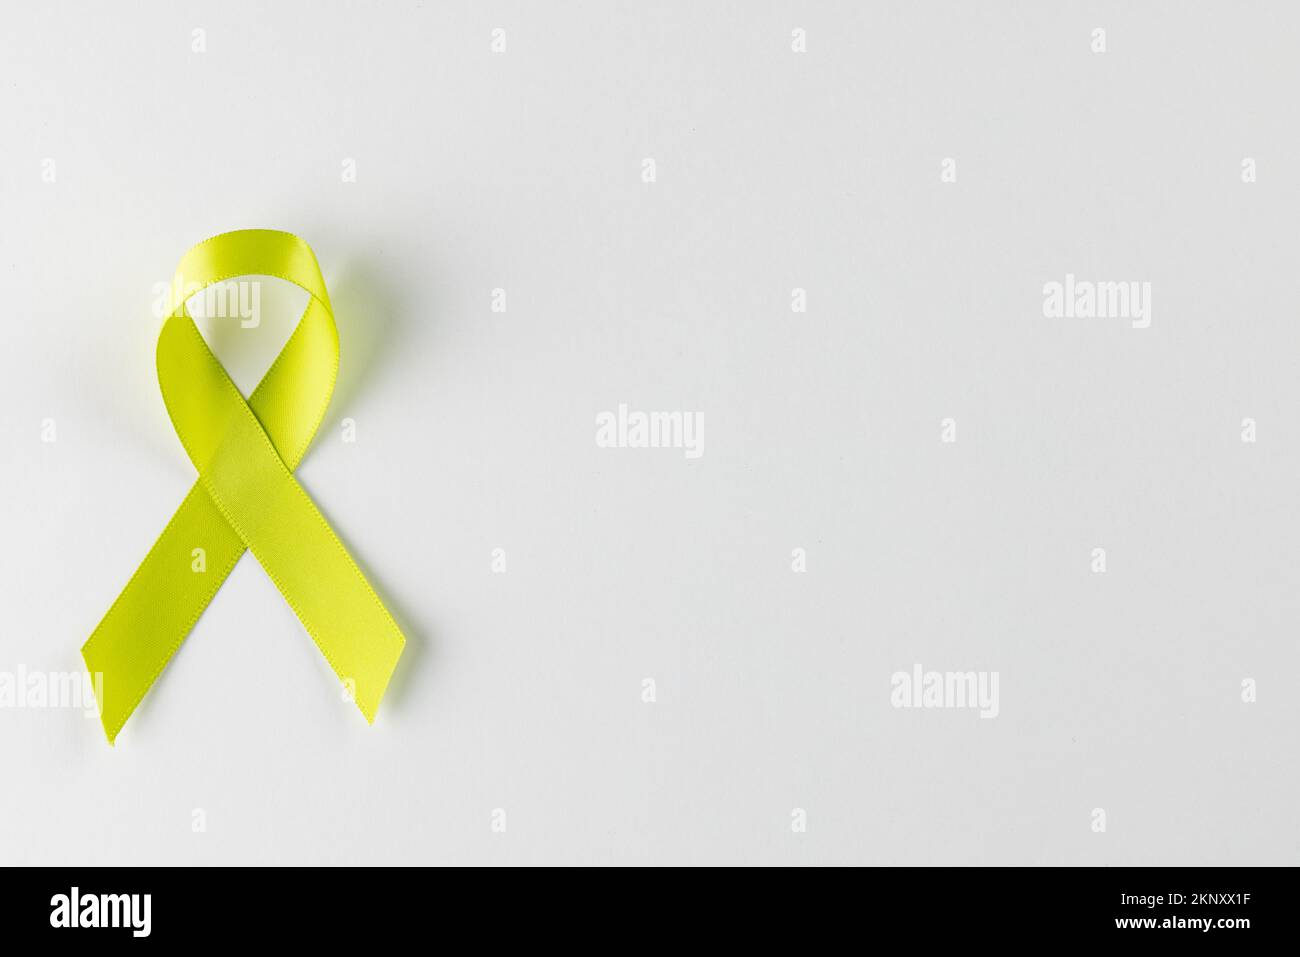 Composition of light green std health awareness ribbon, on white background with copy space Stock Photo